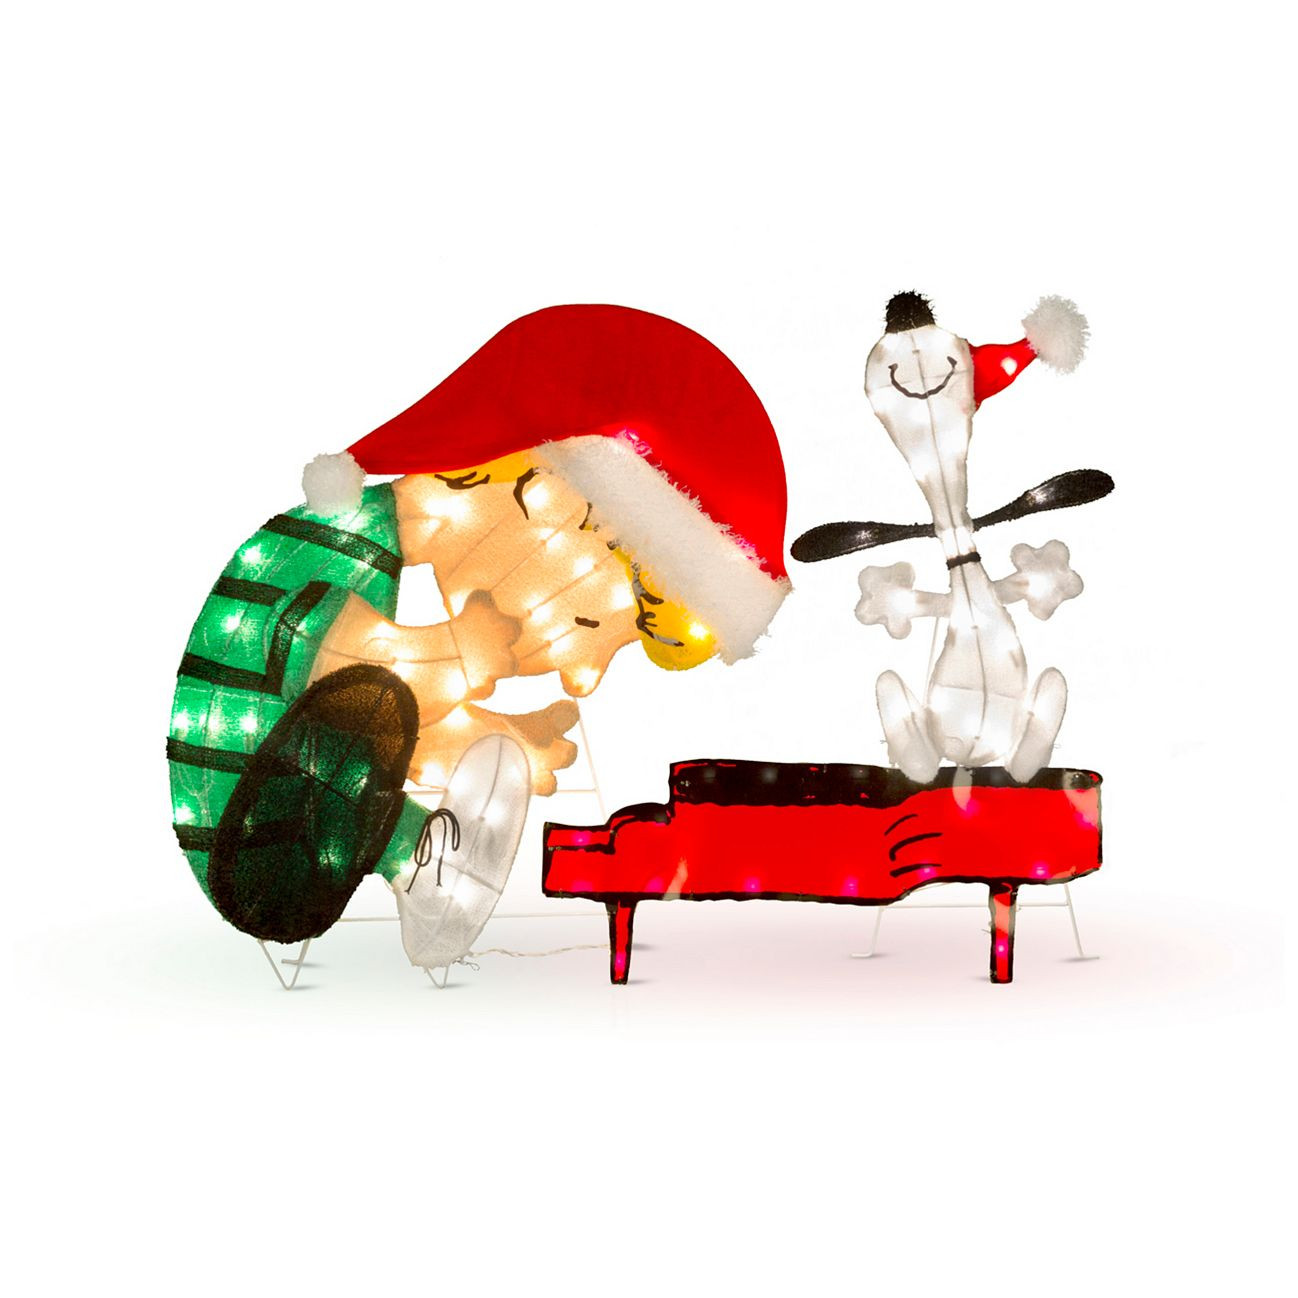 Lighted Schroeder Snoopy and Leaning Lucy Peanuts Christmas Decoration 